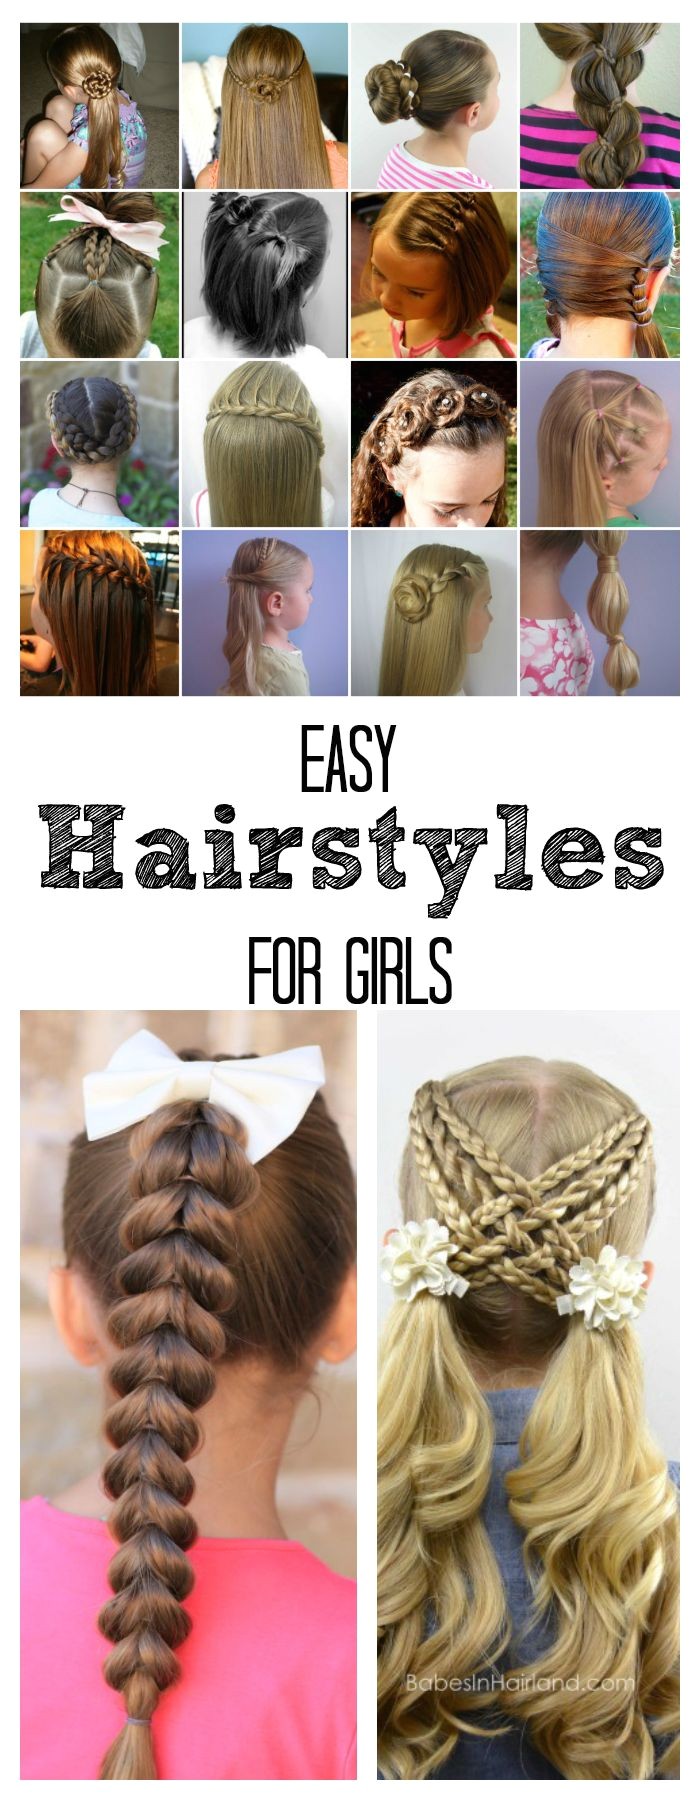 easy hairstyles for girls